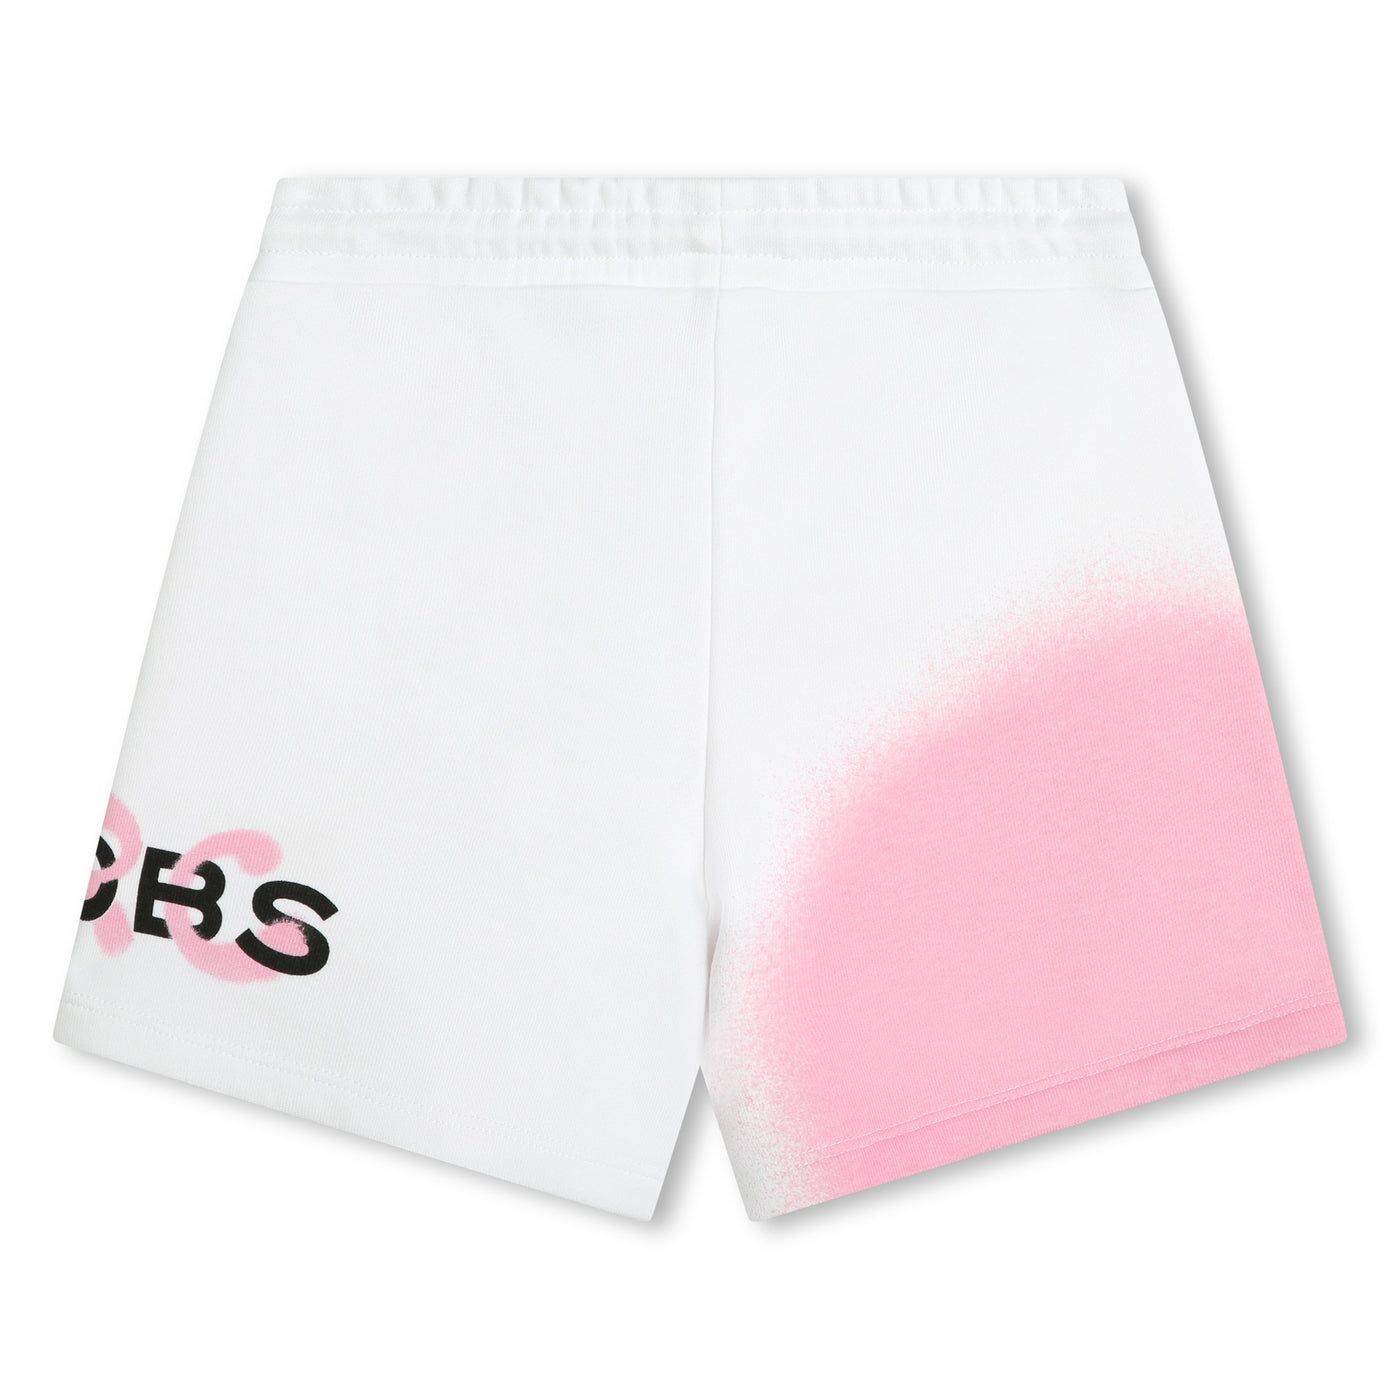 White Splat pink Shorts by Marc Jacobs